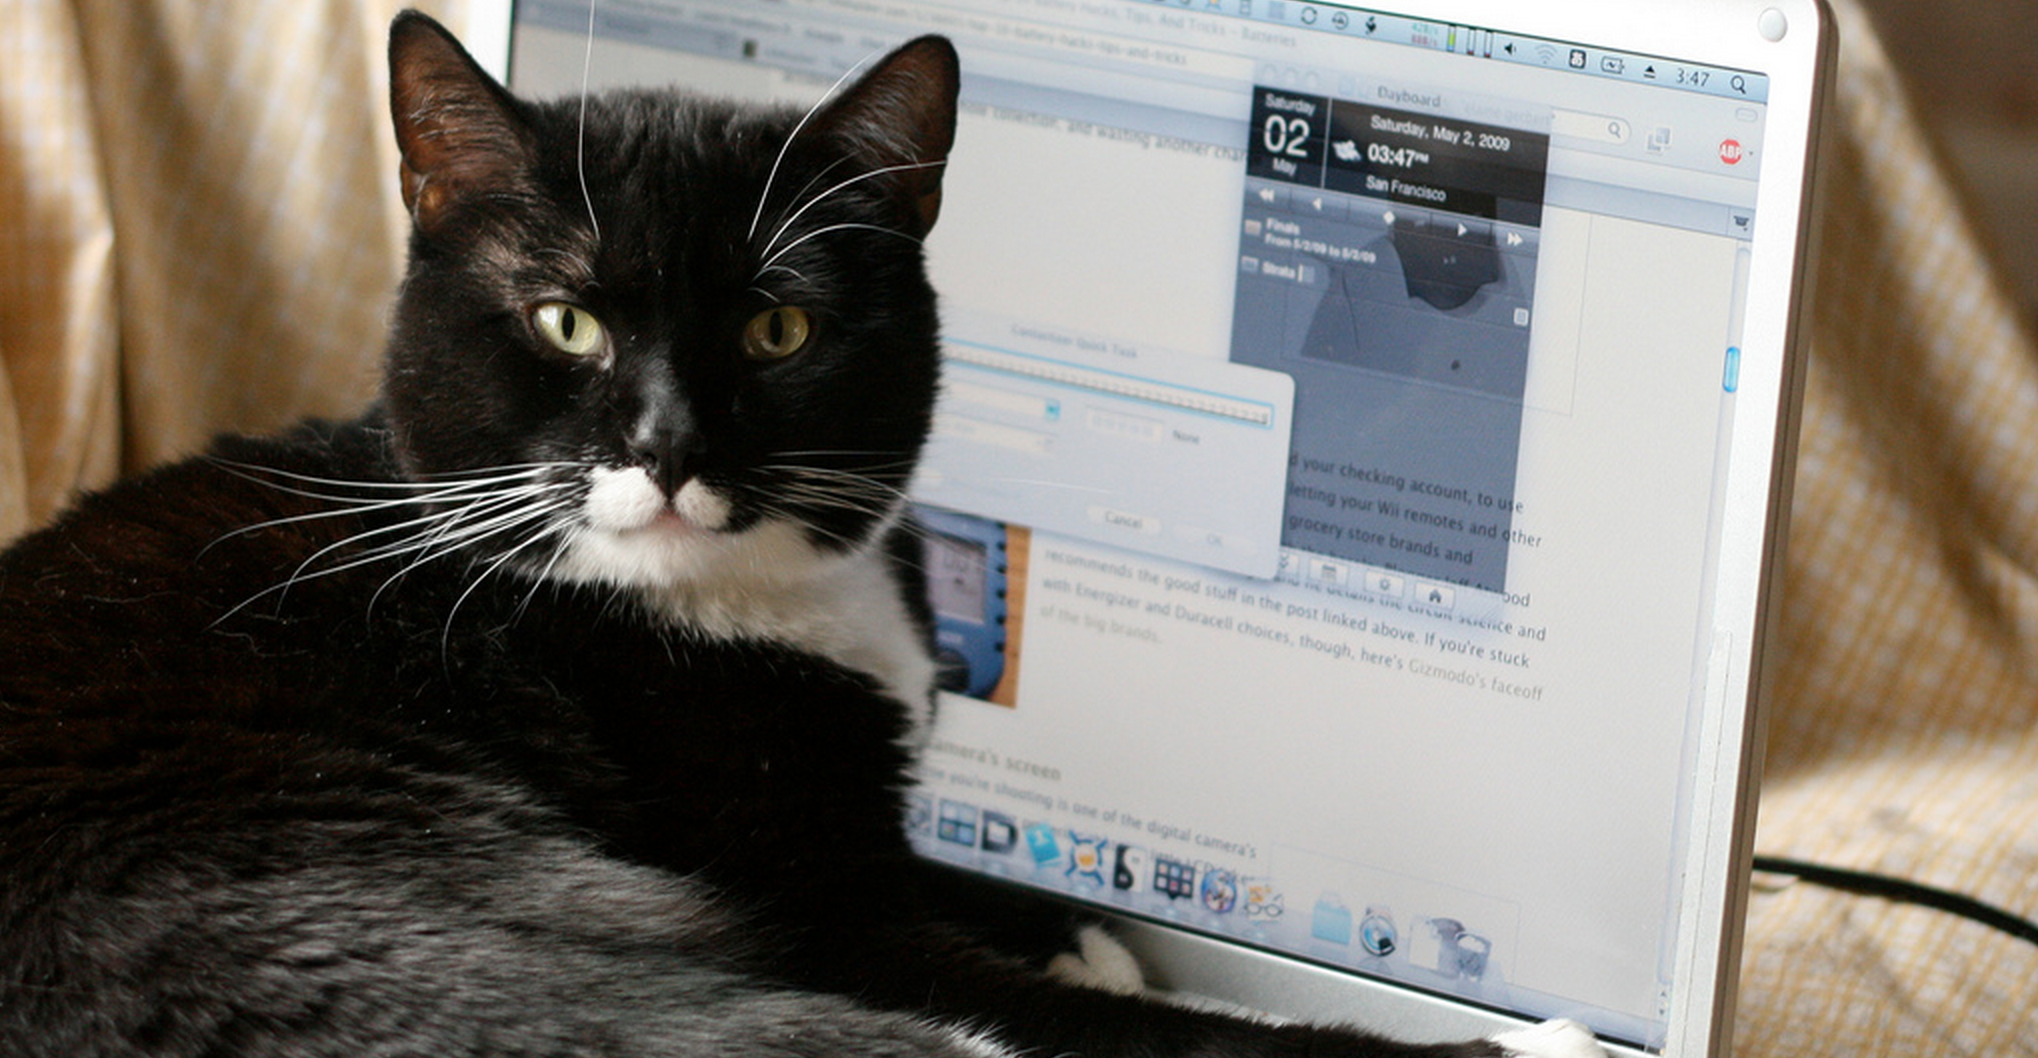 dell responds after customers claim laptop smells like cat urine  image 1